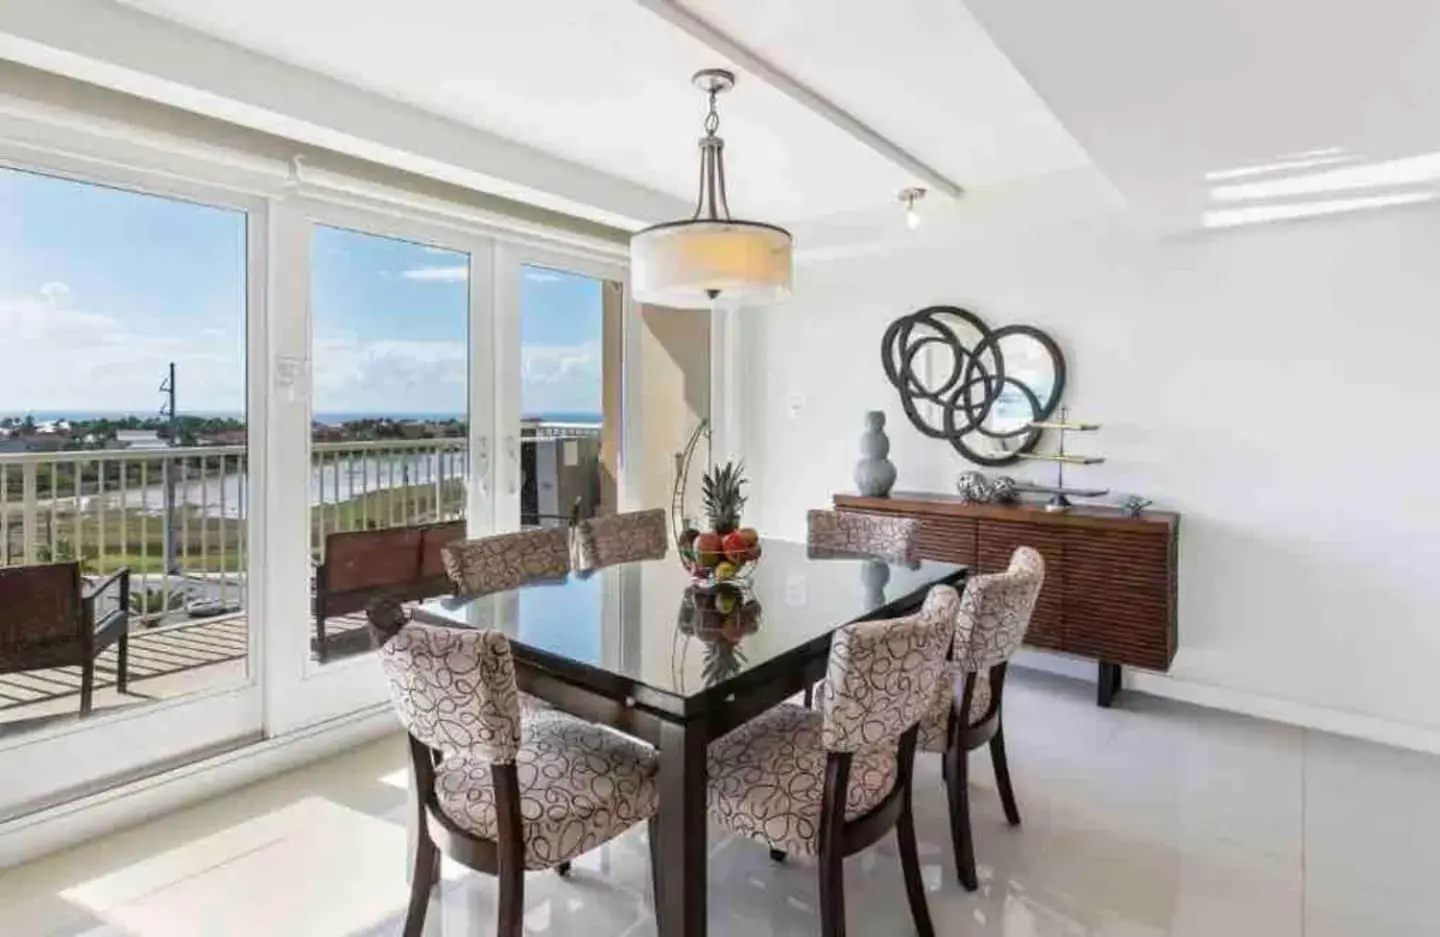 Dining Area in Bahia Mar Solare Tower 6th floor Bayview Condo 2bd 2ba with Pools and Hot tubs